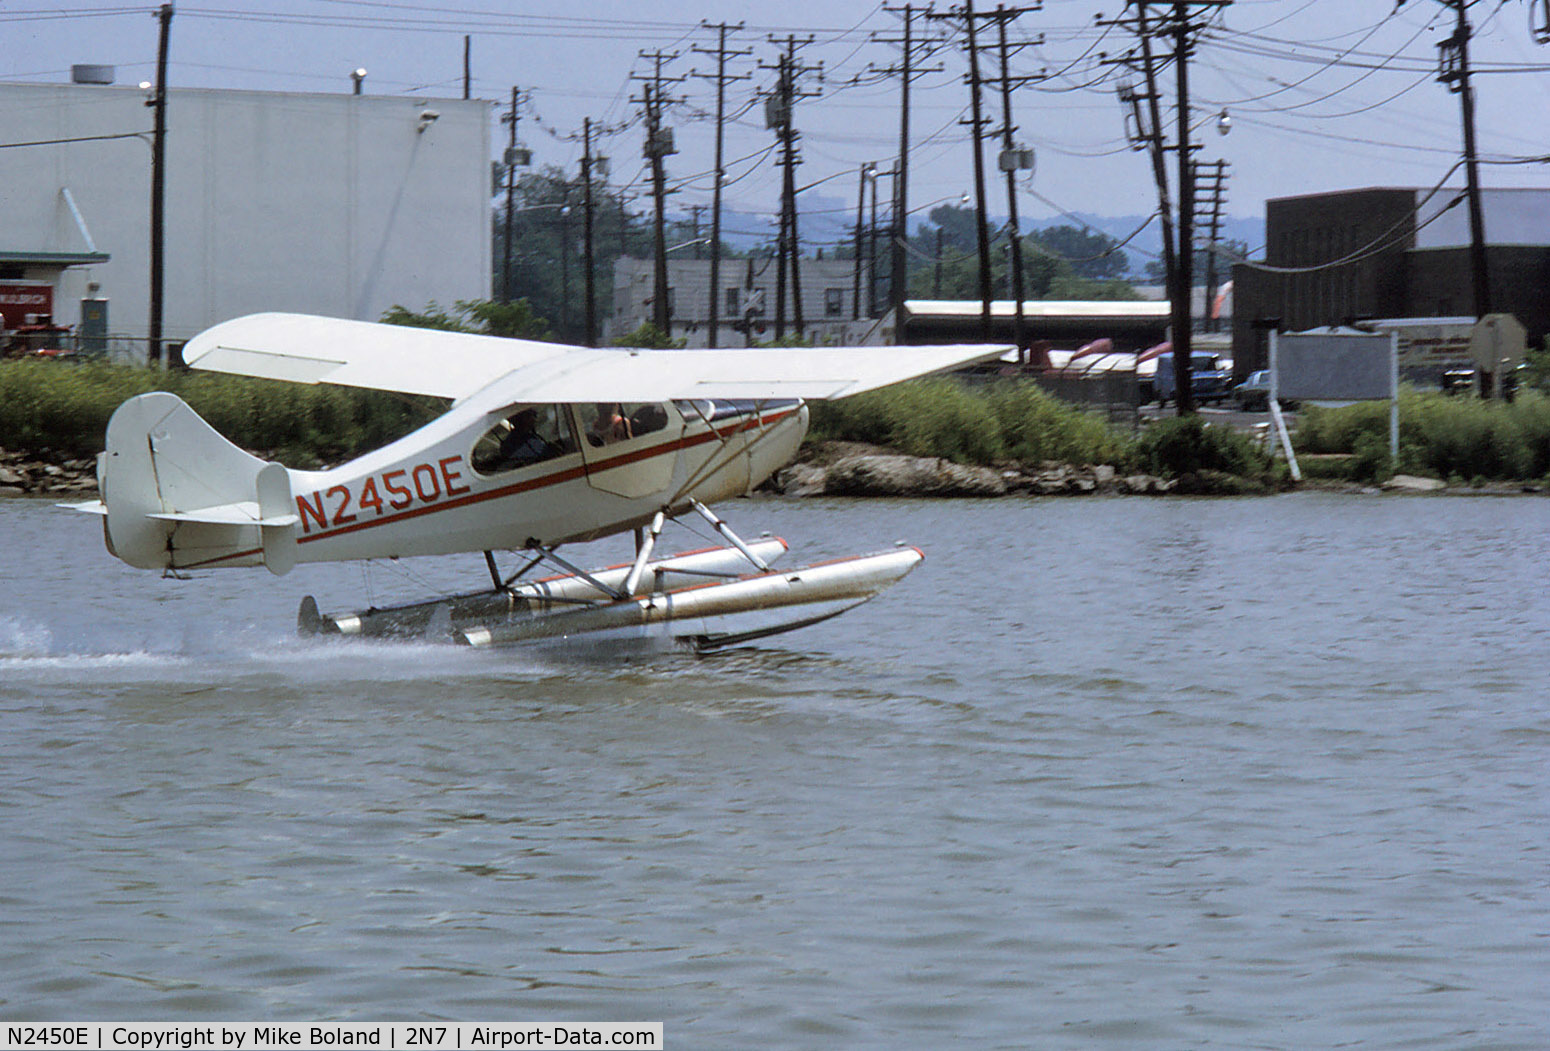 N2450E, 1946 Aeronca S7CCM C/N 7AC-6030, 1946 Aeronca S7CCM N2450E, taking off, Little Ferry Sea Plane Base, 1972. Got my seaplane rating in this.